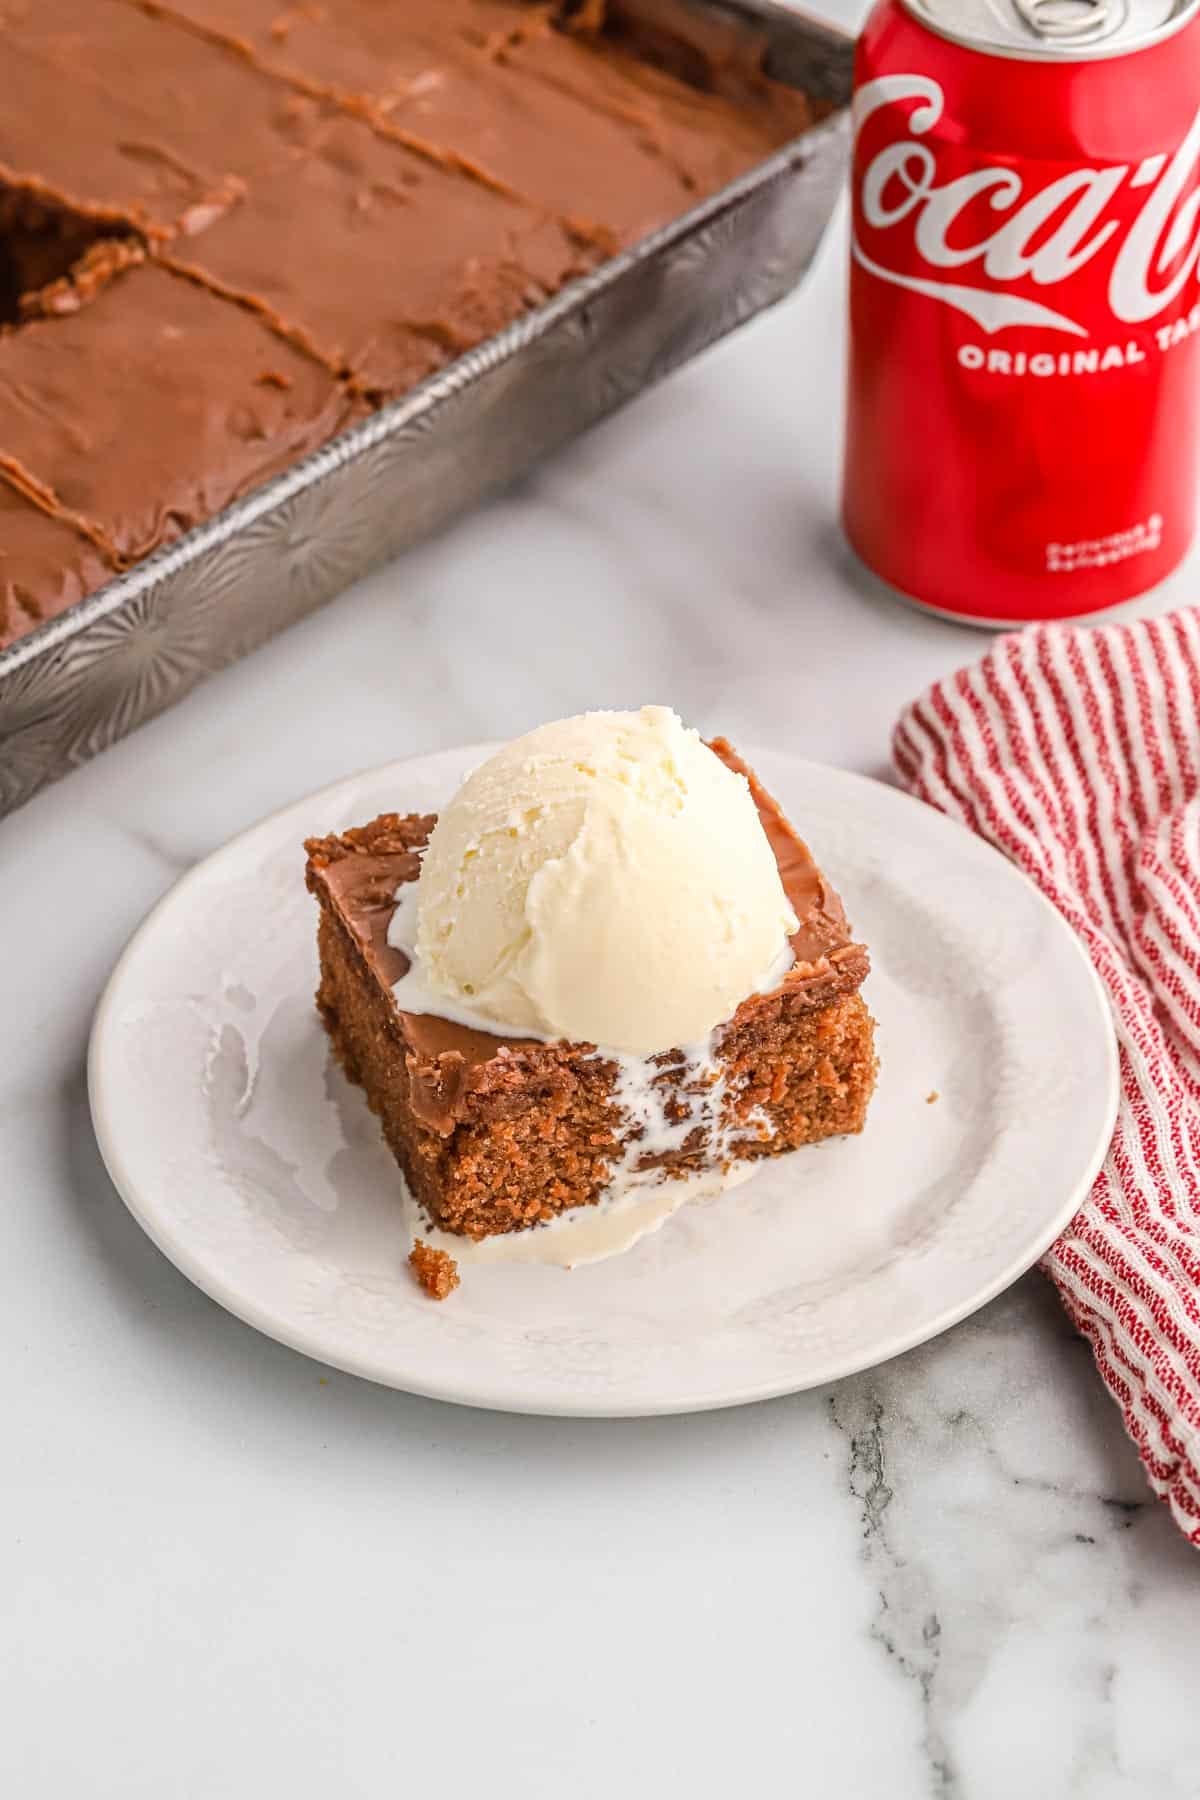  Coca cola cake on a plate with a scoop of ice cream on top and a can of coca cola behind.